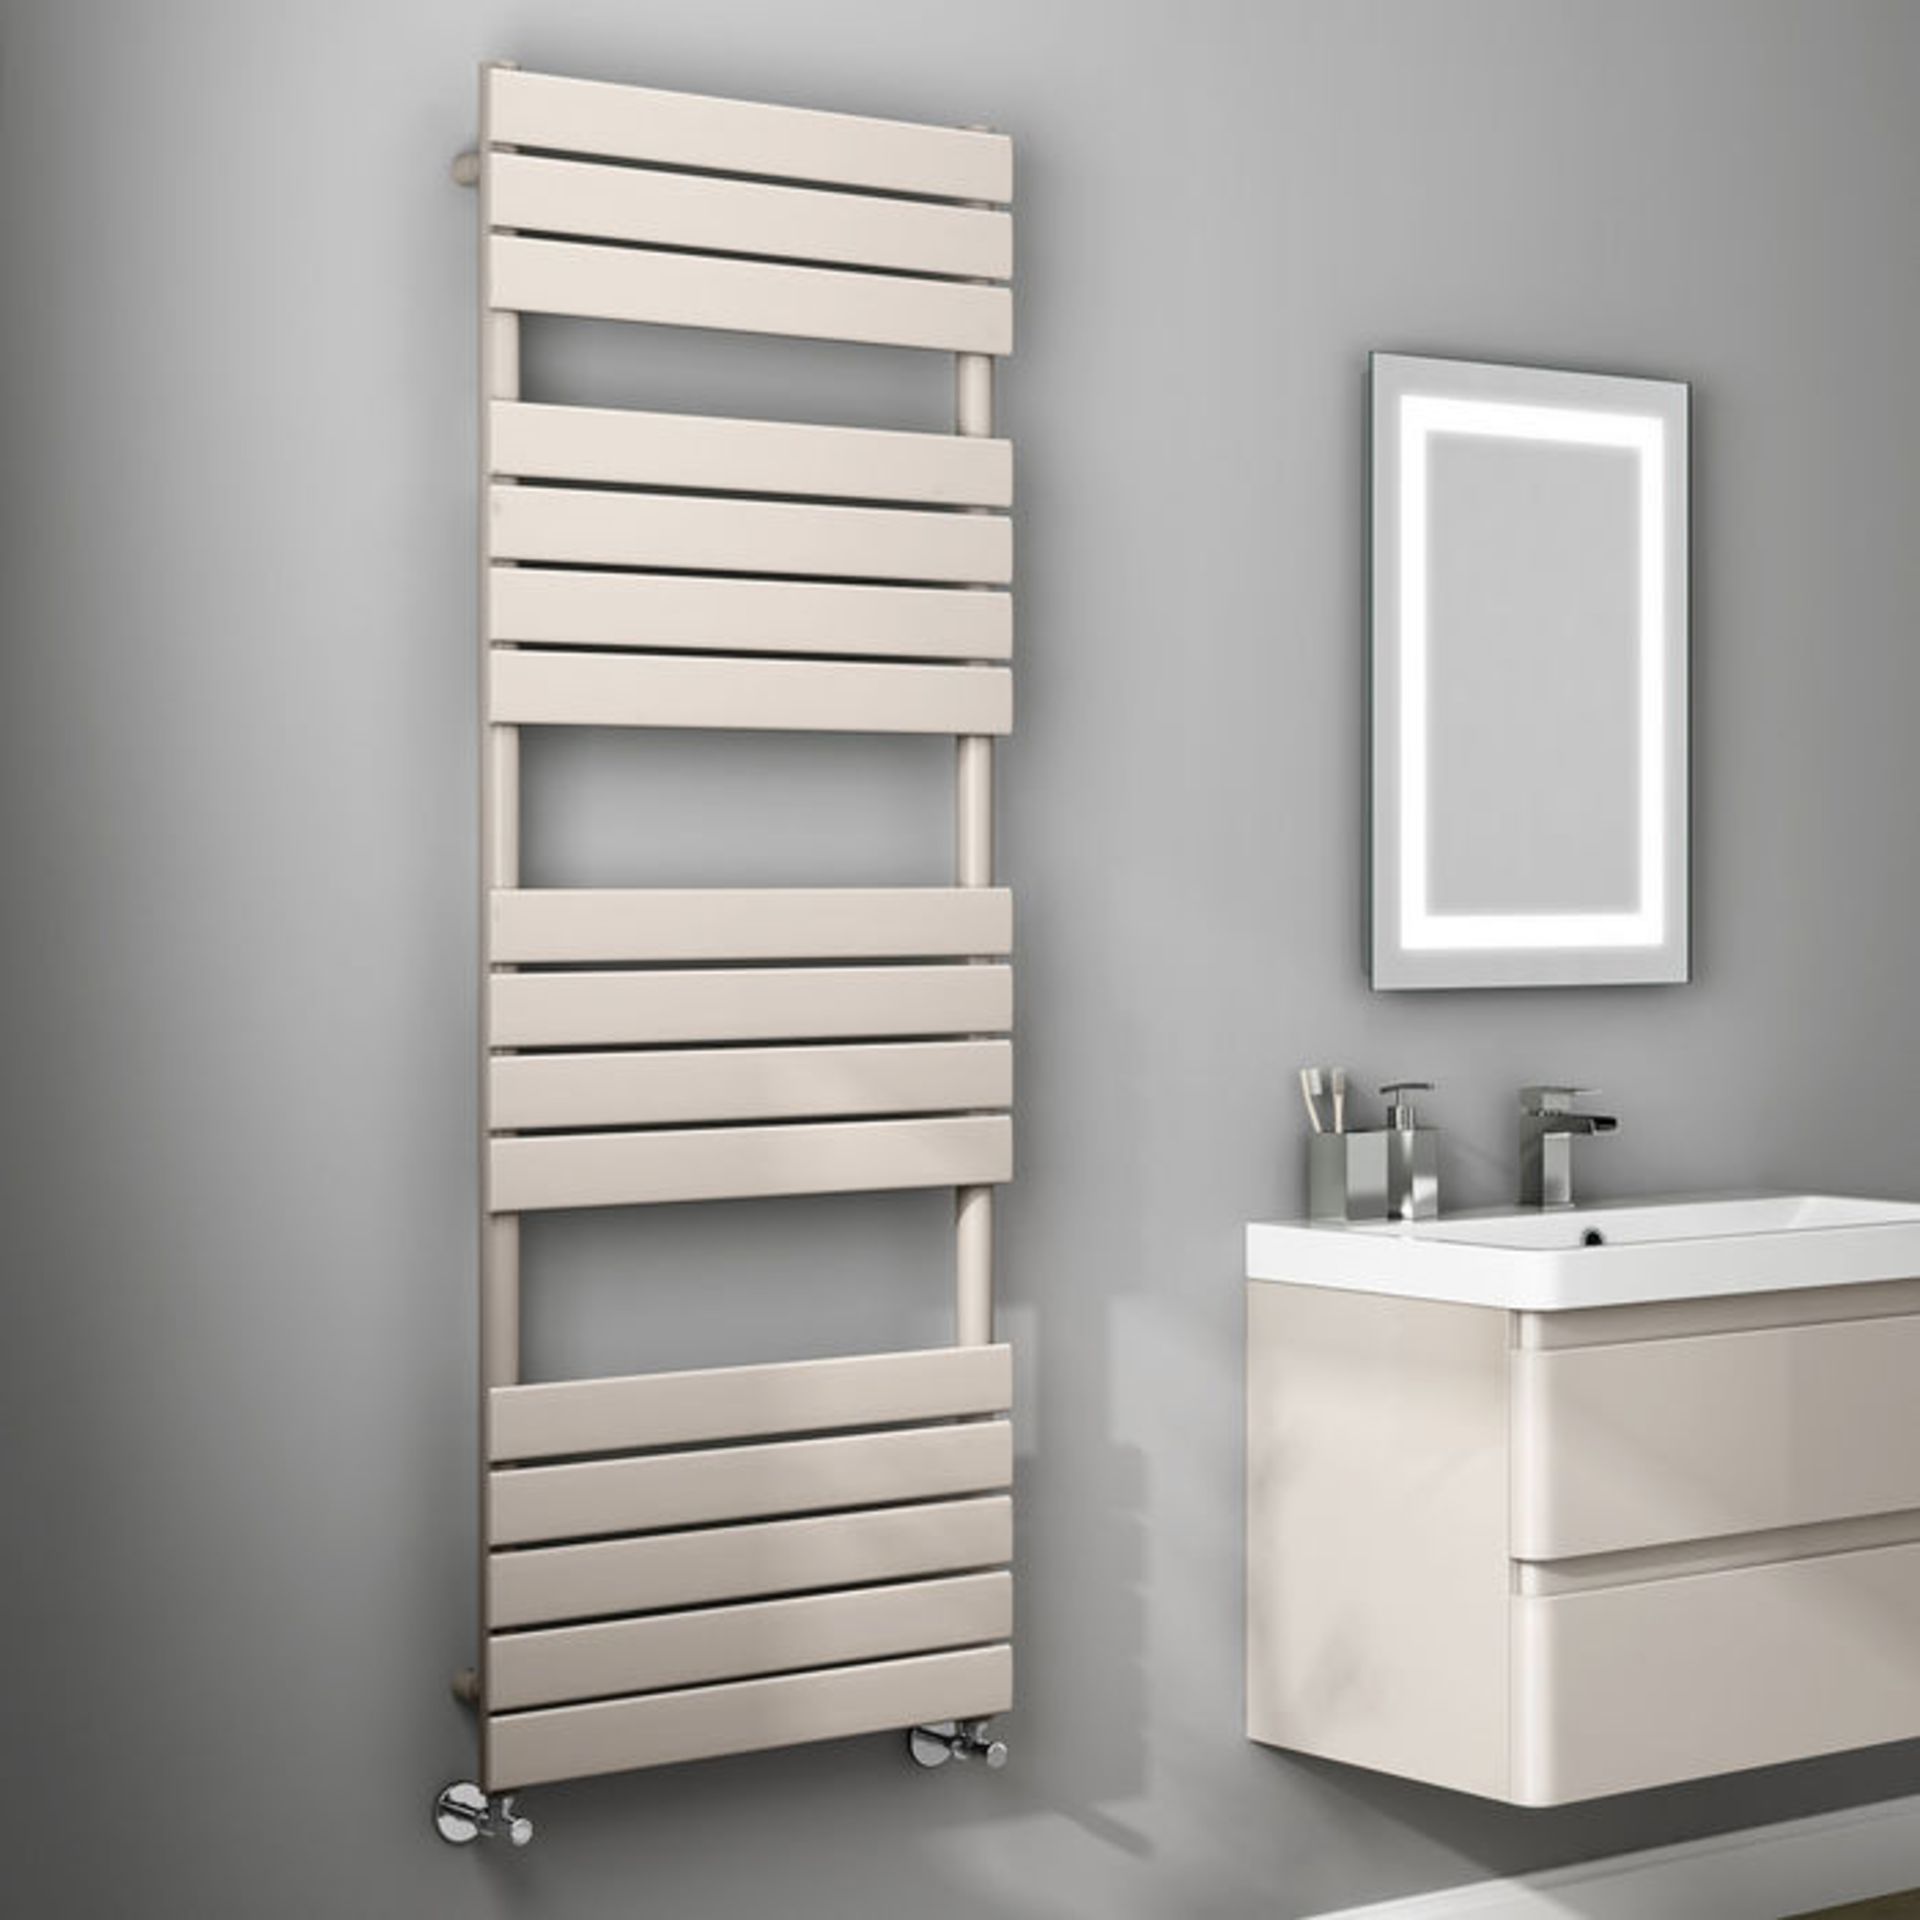 (W220) 1600x600mm Latte Flat Panel Ladder Towel Radiator. Made from high quality low carbon steel